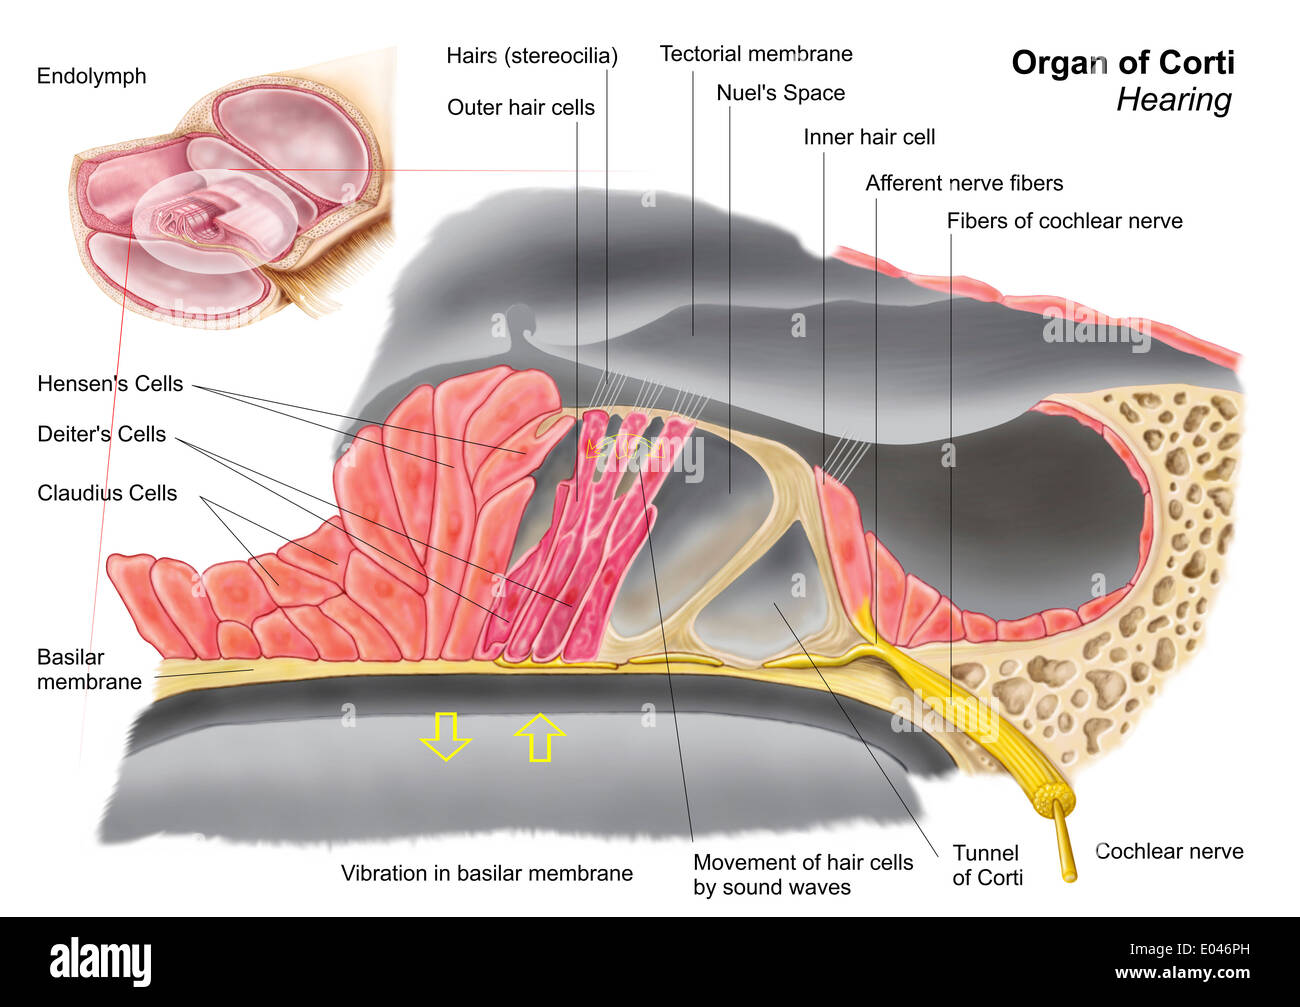 Anatomy of the organ of Corti, part of the cochlea of the inner ear. Stock Photo